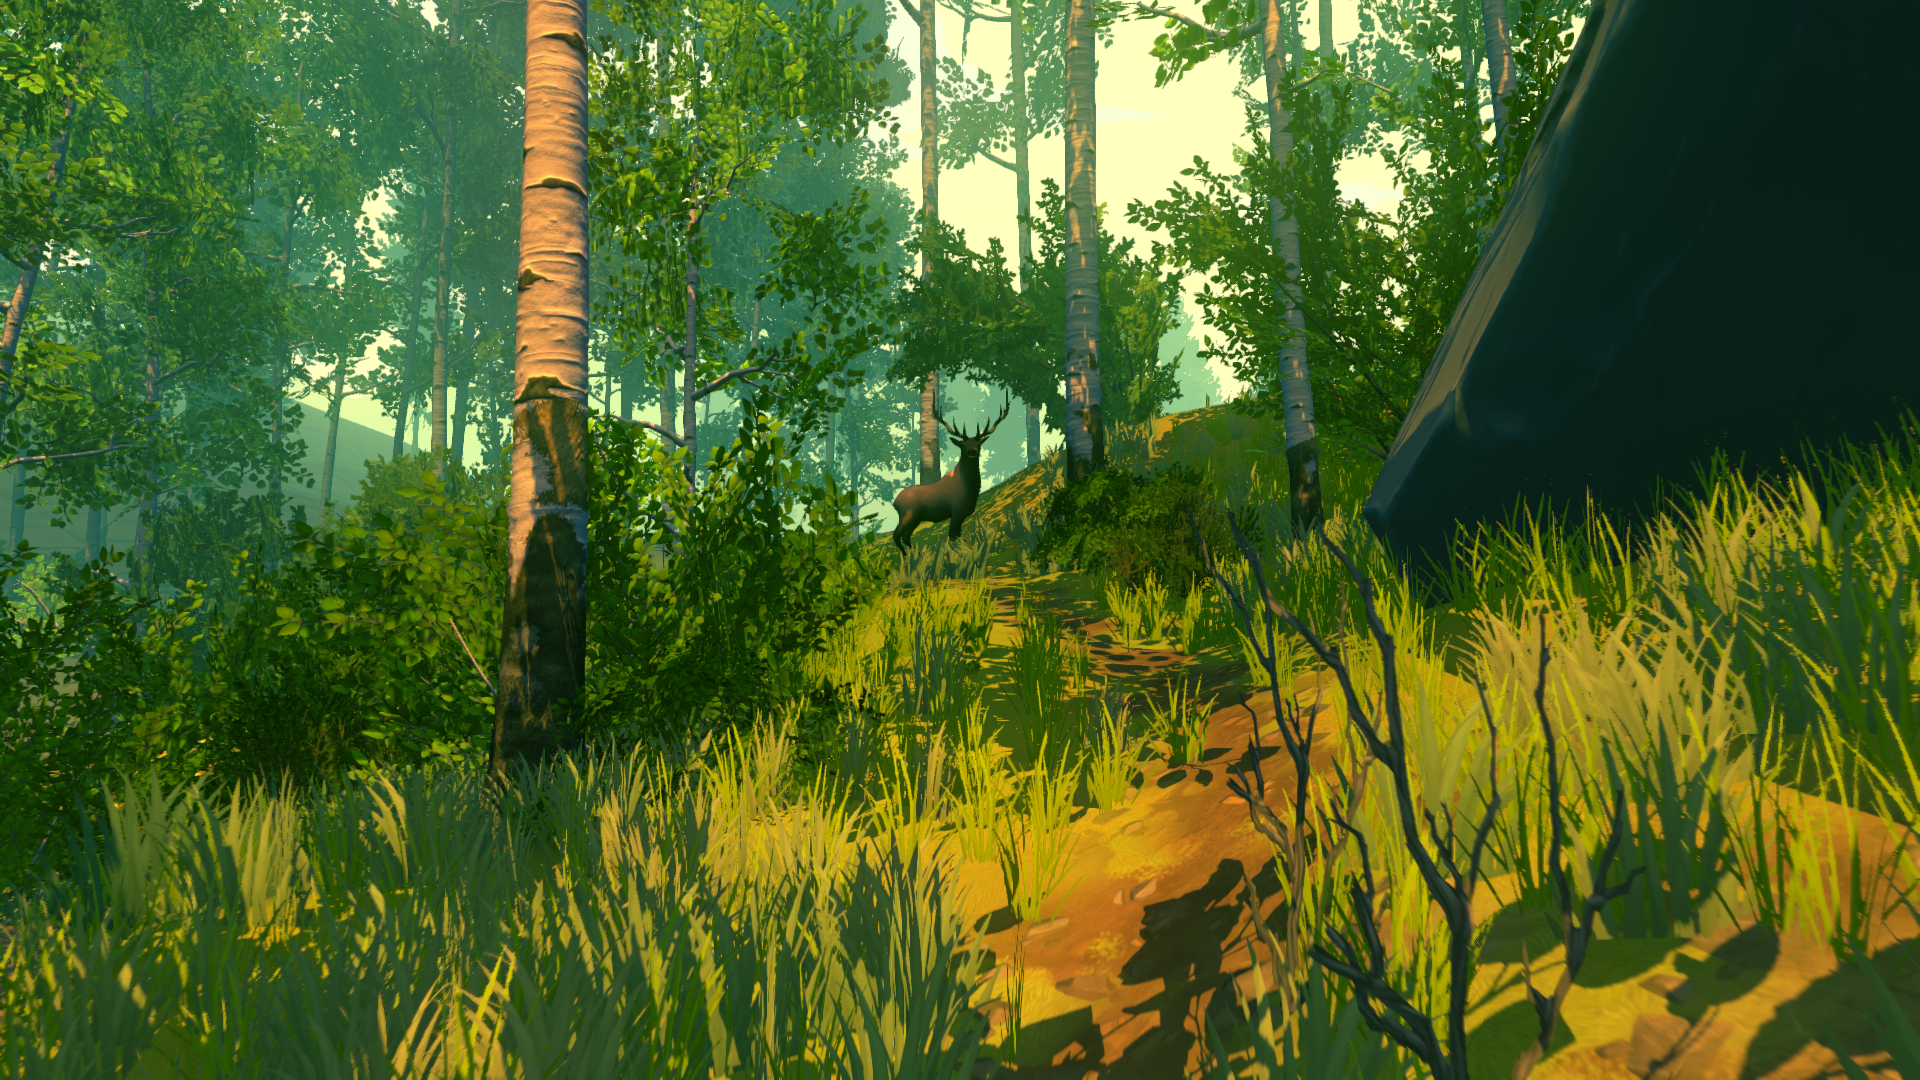 download the last version for windows Firewatch